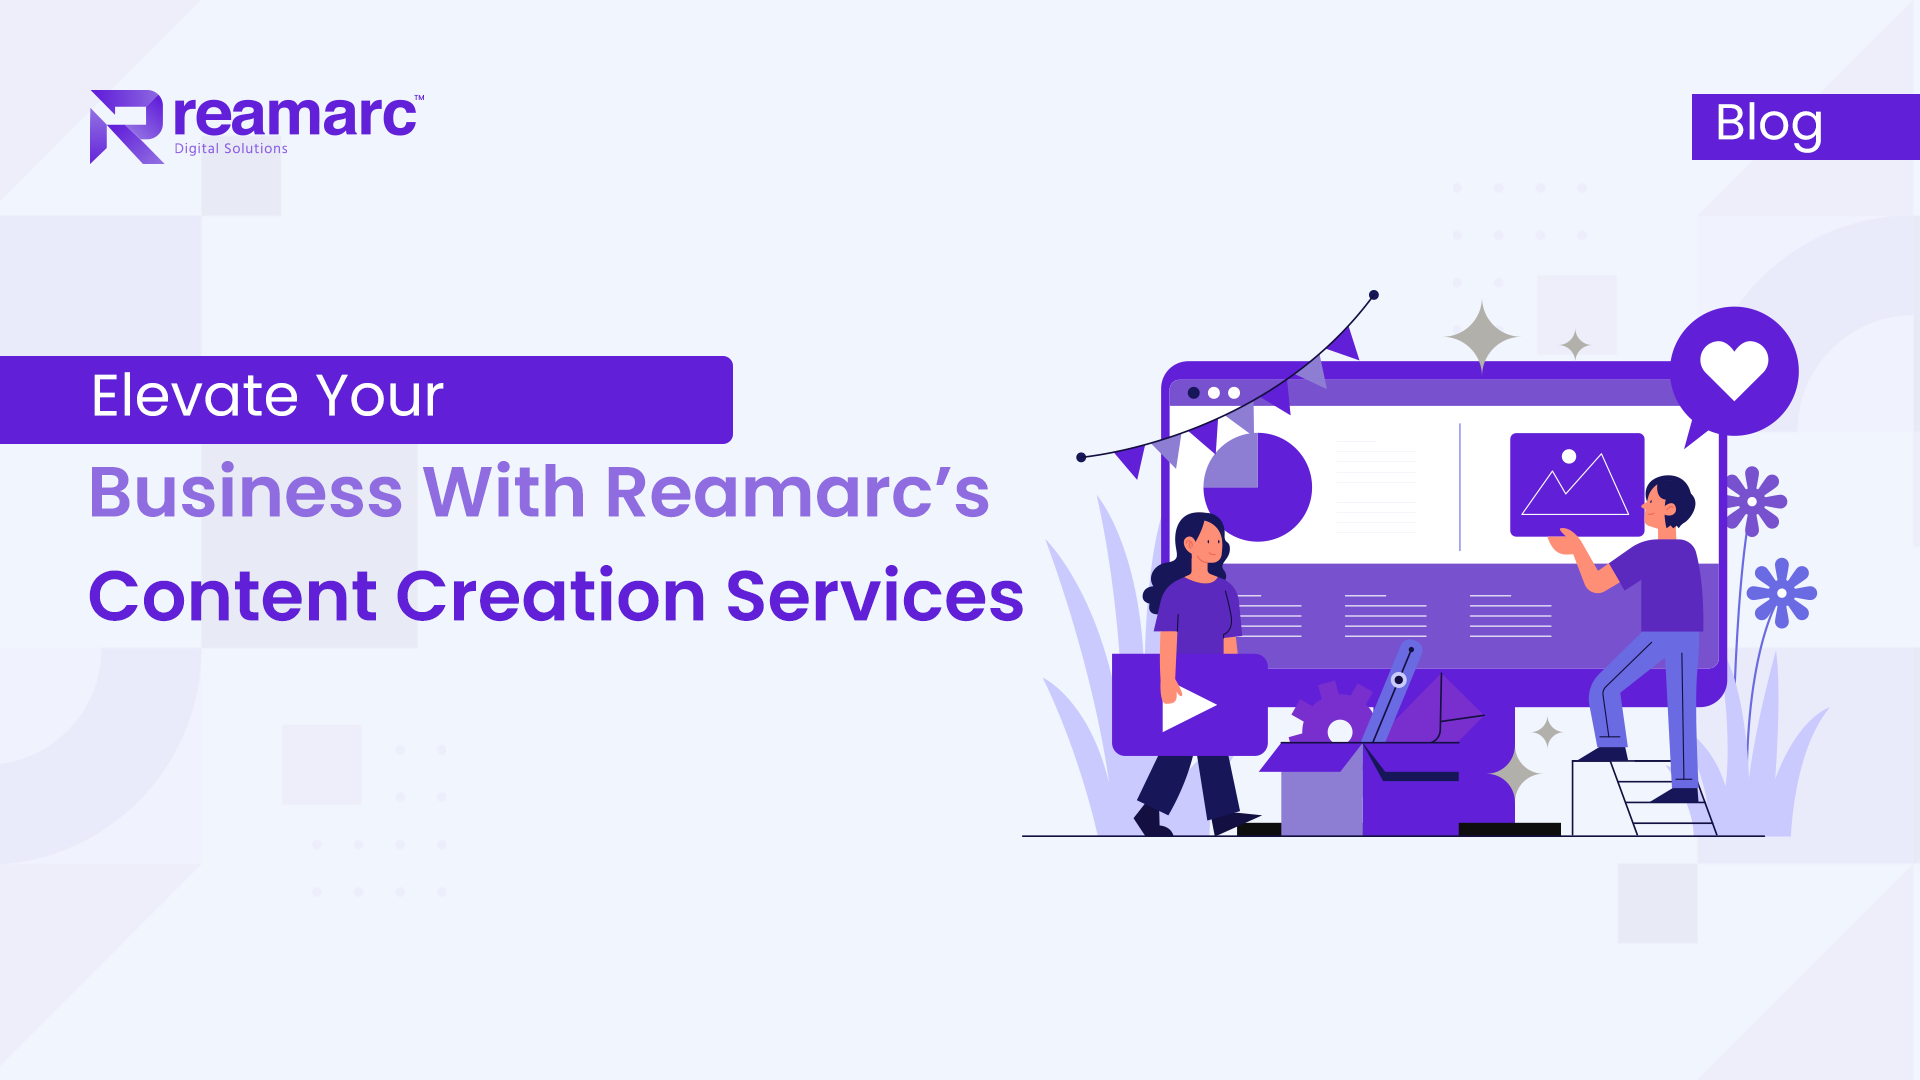 Reamarc Content Creation Services to Expand Your Business